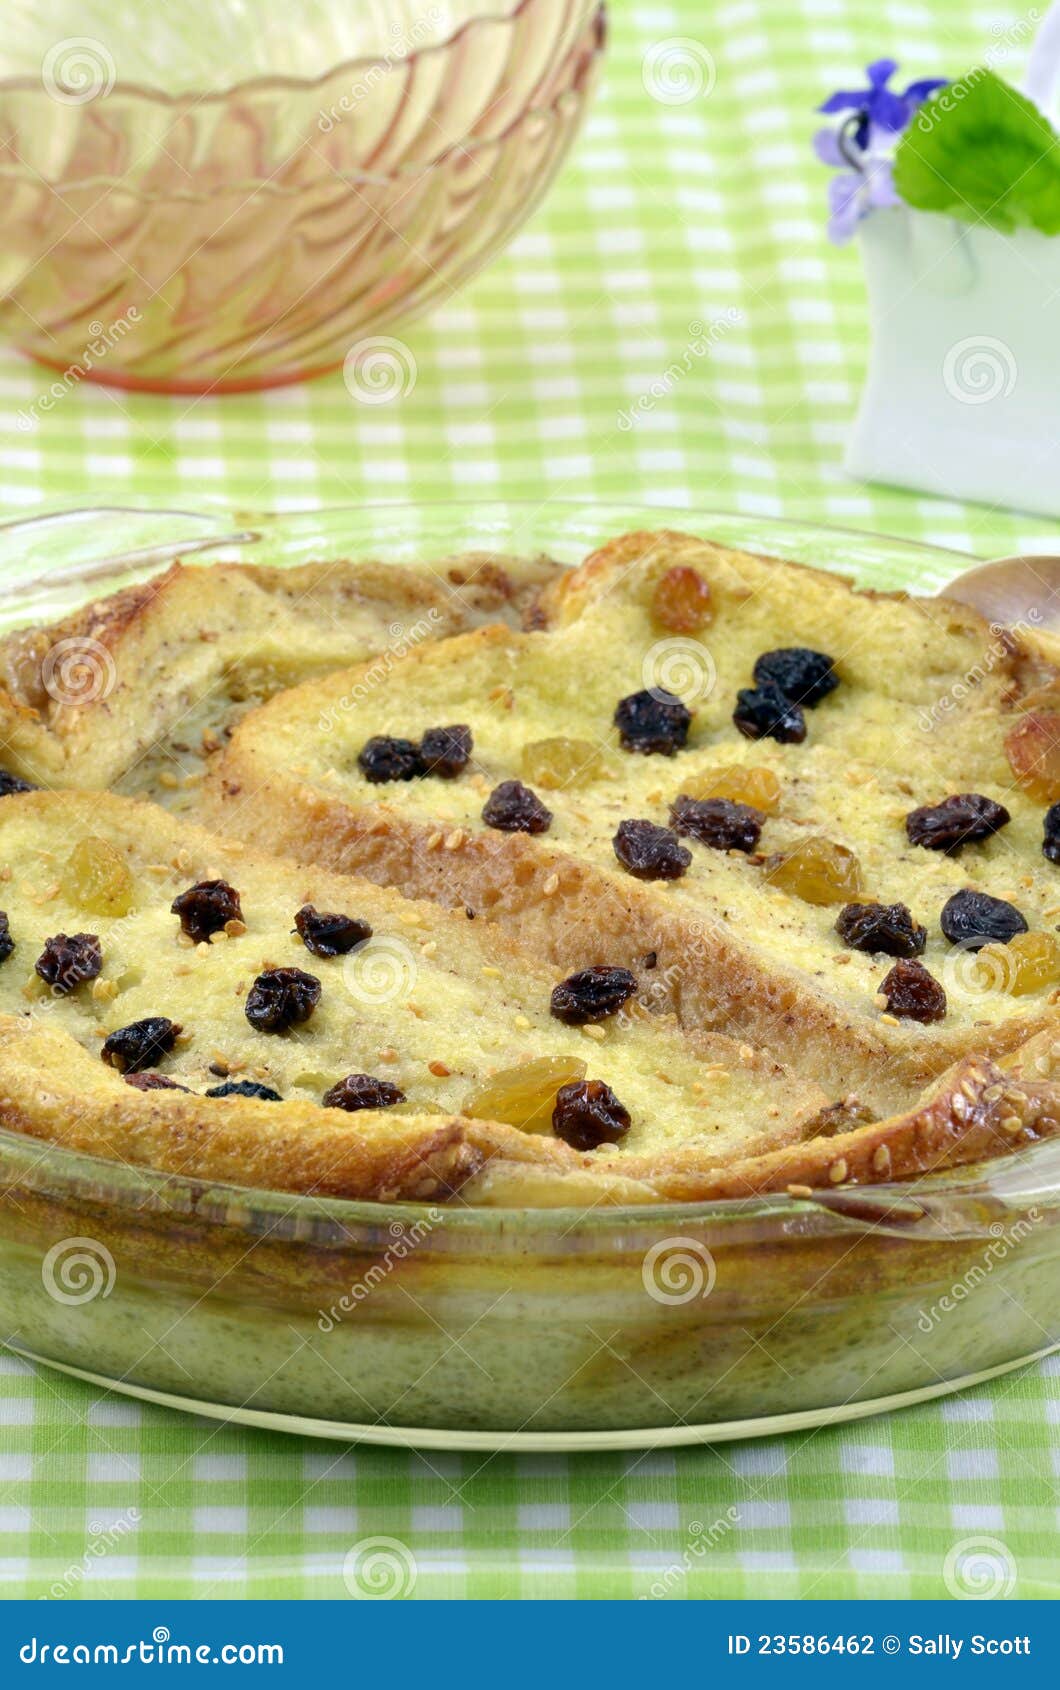 Bread and Butter pudding stock photo. Image of bread - 23586462